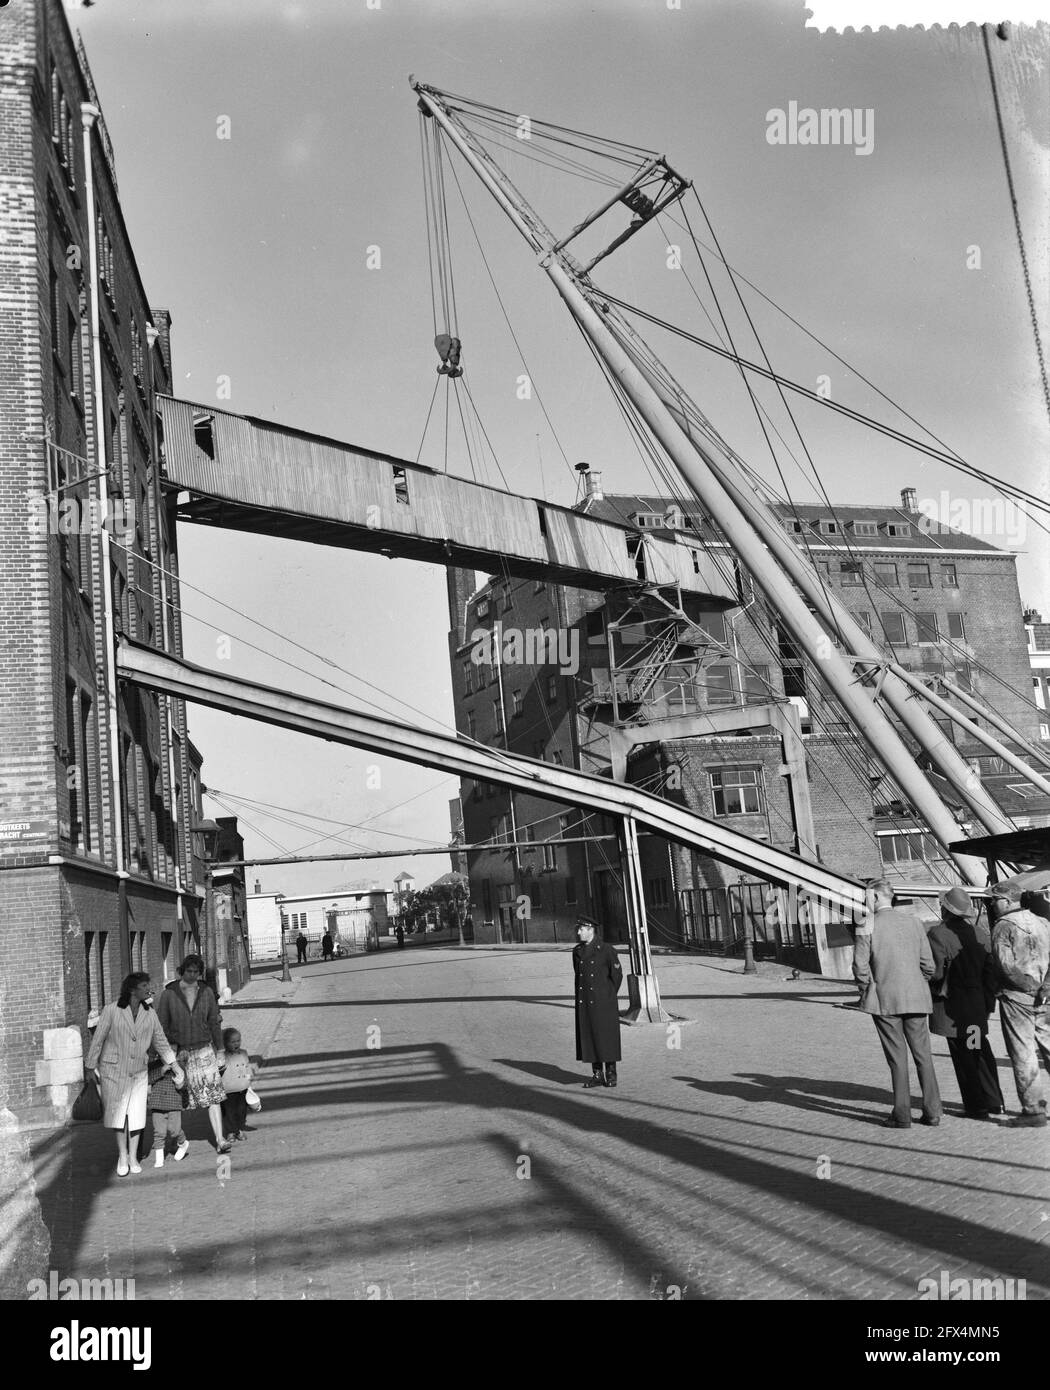 Demolition of connecting bridge of the Meelfabriek Holland, November 10, 1959, SLOPEN, connecting bridges, The Netherlands, 20th century press agency photo, news to remember, documentary, historic photography 1945-1990, visual stories, human history of the Twentieth Century, capturing moments in time Stock Photo